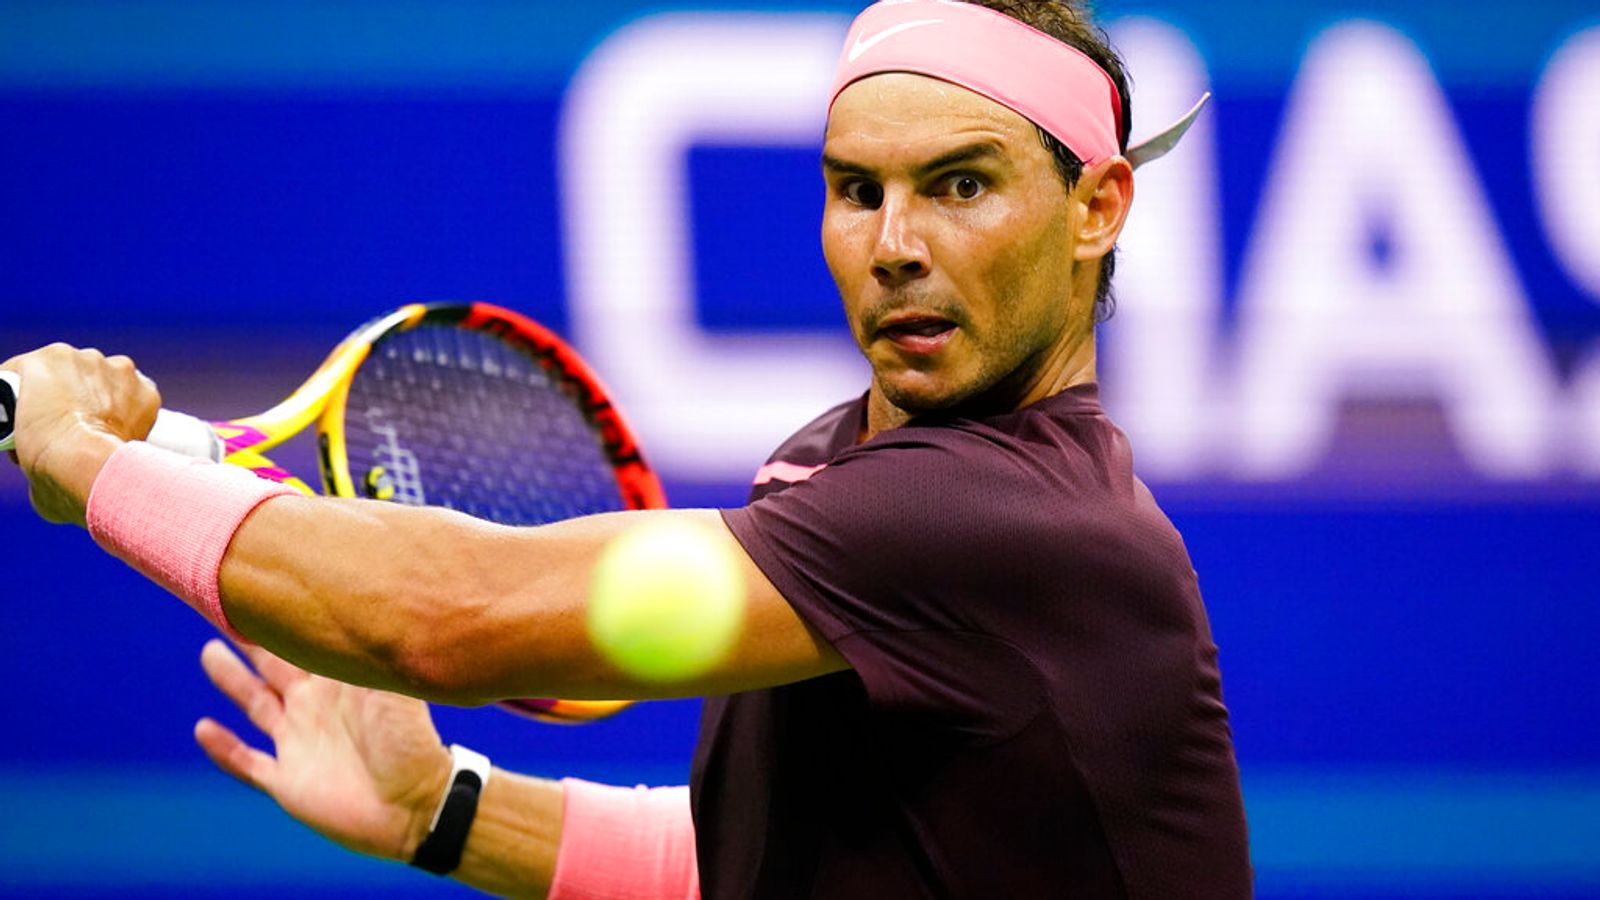 us-open-rafael-nadal-recovers-to-secure-first-round-victory